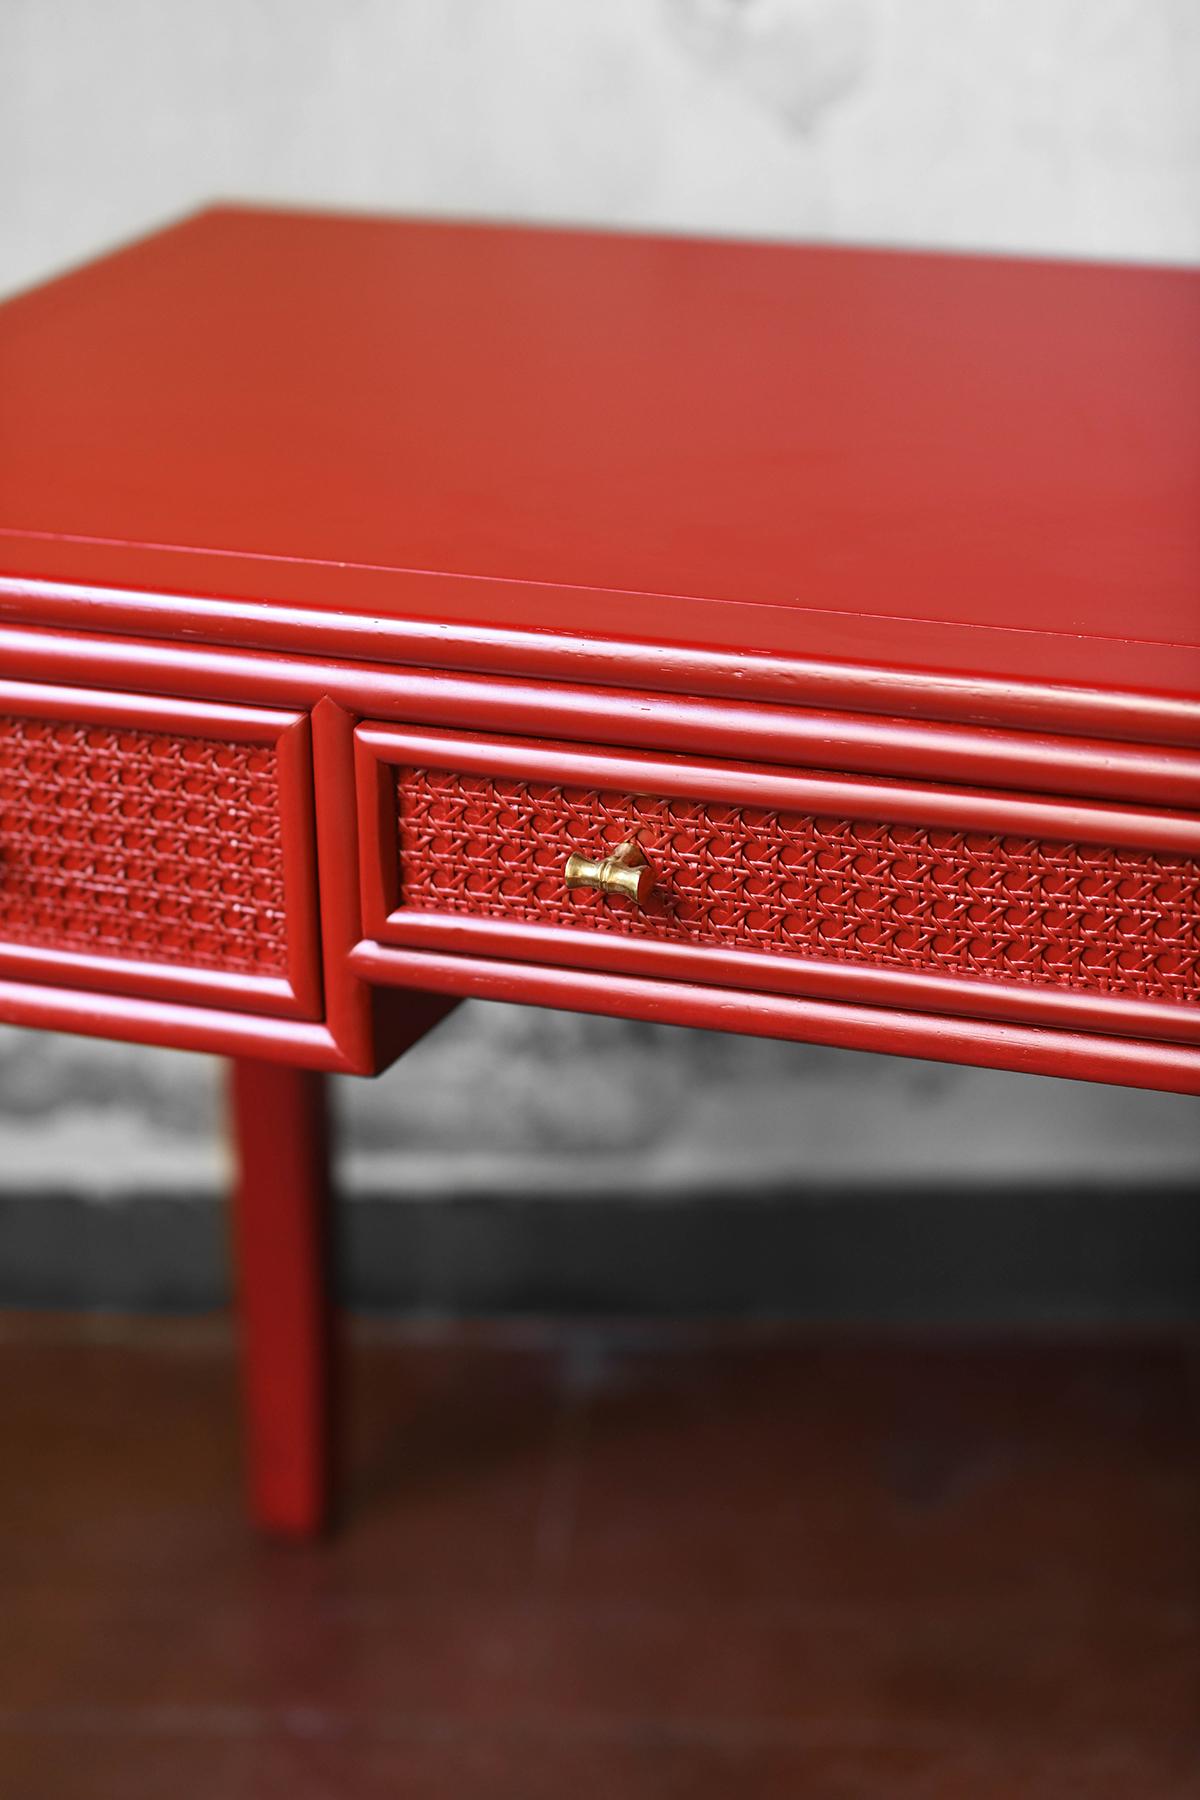 China red lacquered desk, Elinor and John McGuire for Lyda Levi 1